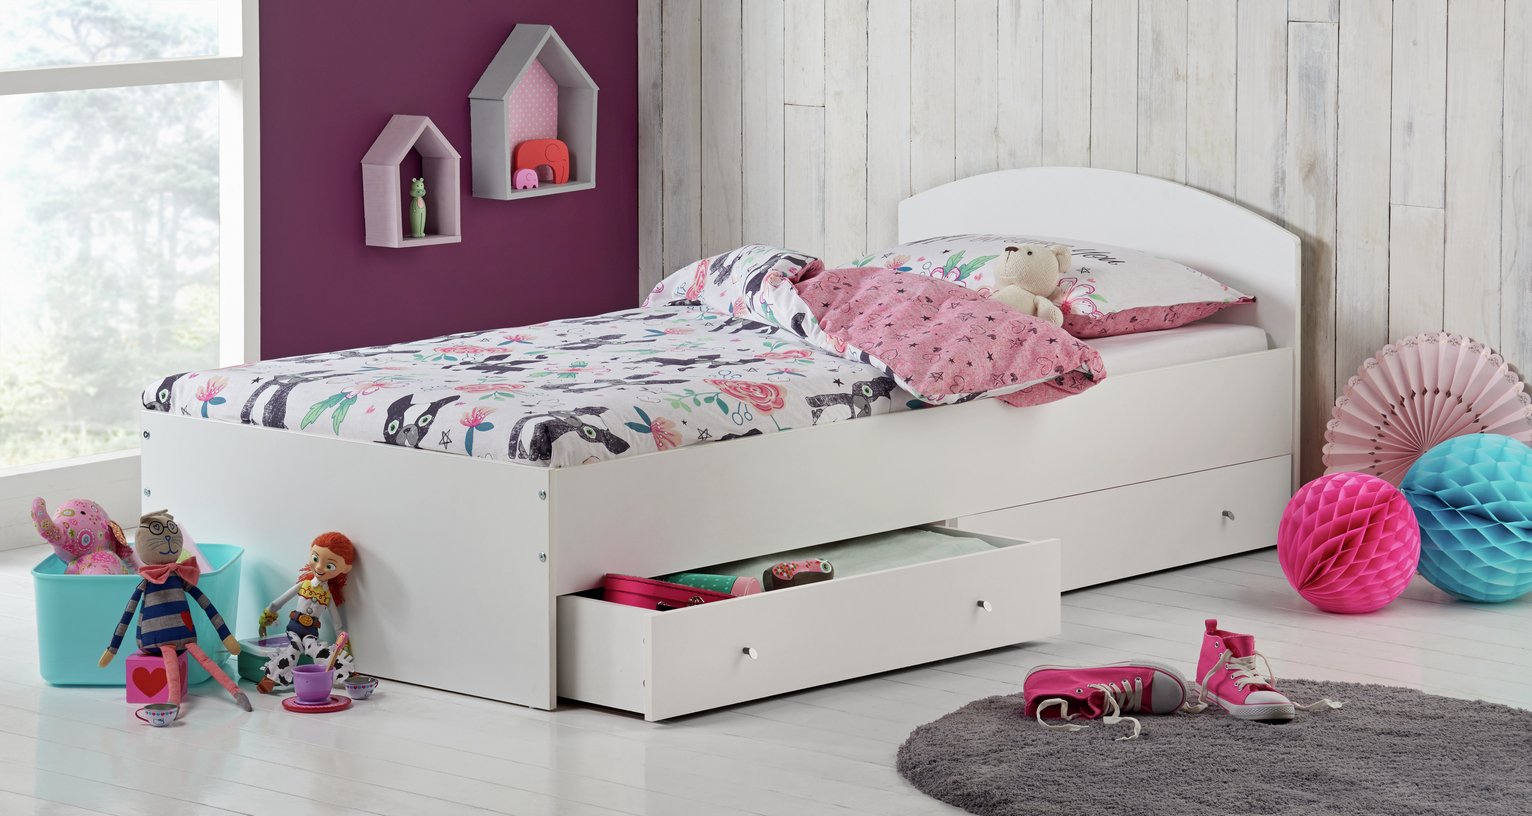 Argos Home Malibu White Single Bed Frame with 2 Drawers